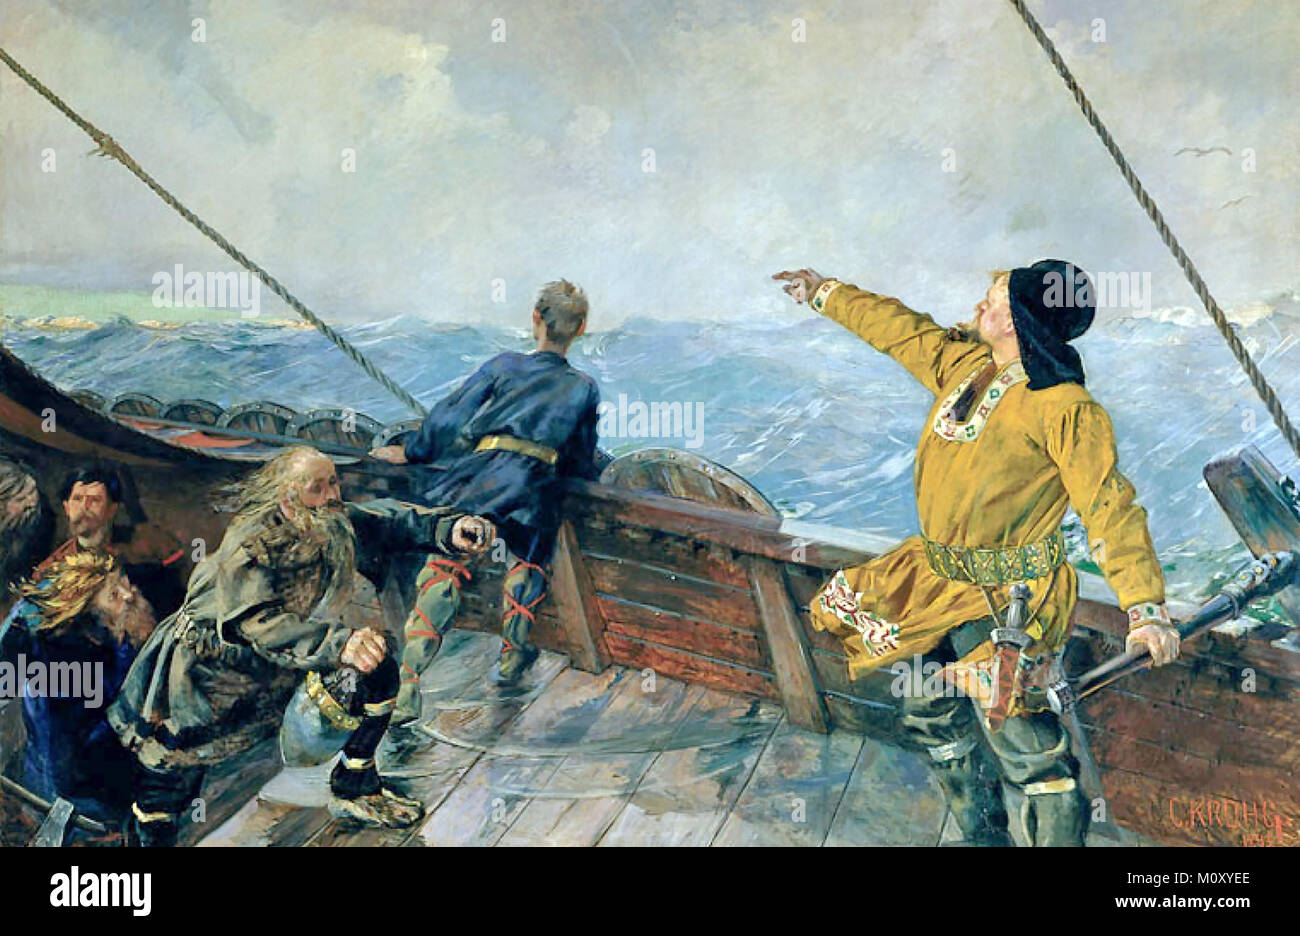 Leif Erikson Leif Eriksson Discovers America by Christian Krohg (1893) Leif Erikson, Leif Ericson (c. 970 – c. 1020) Norse explorer from Iceland. Stock Photo